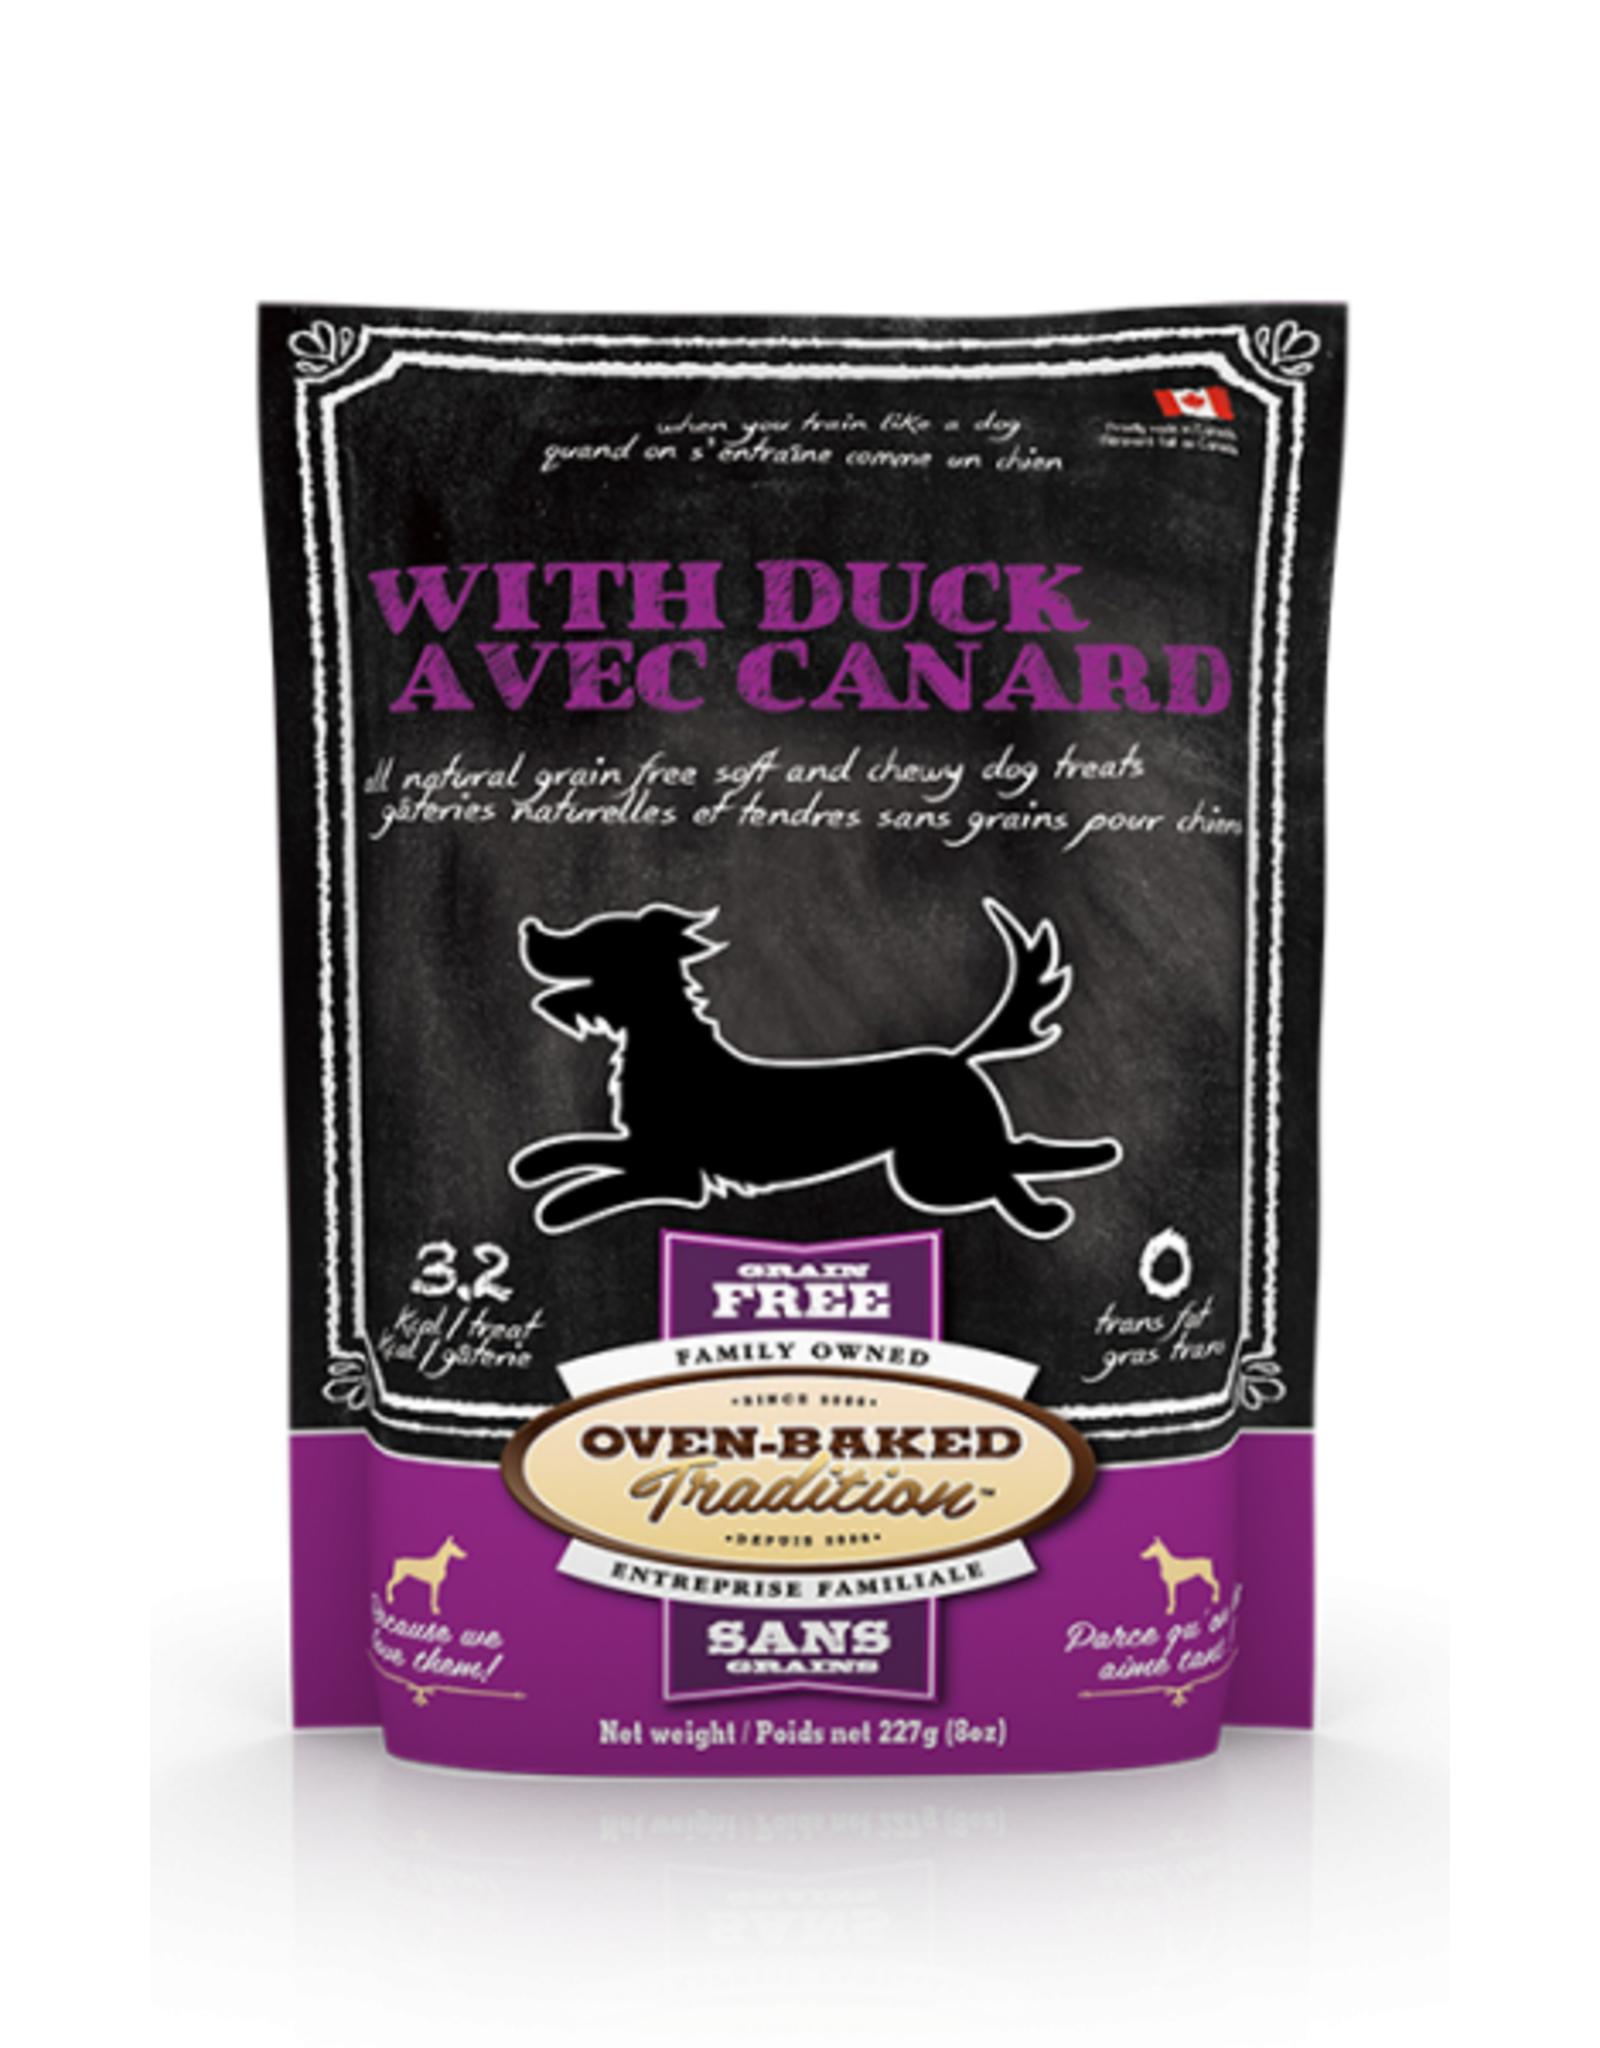 Oven-Baked Tradition Oven-Baked Gâteries Canard 8oz